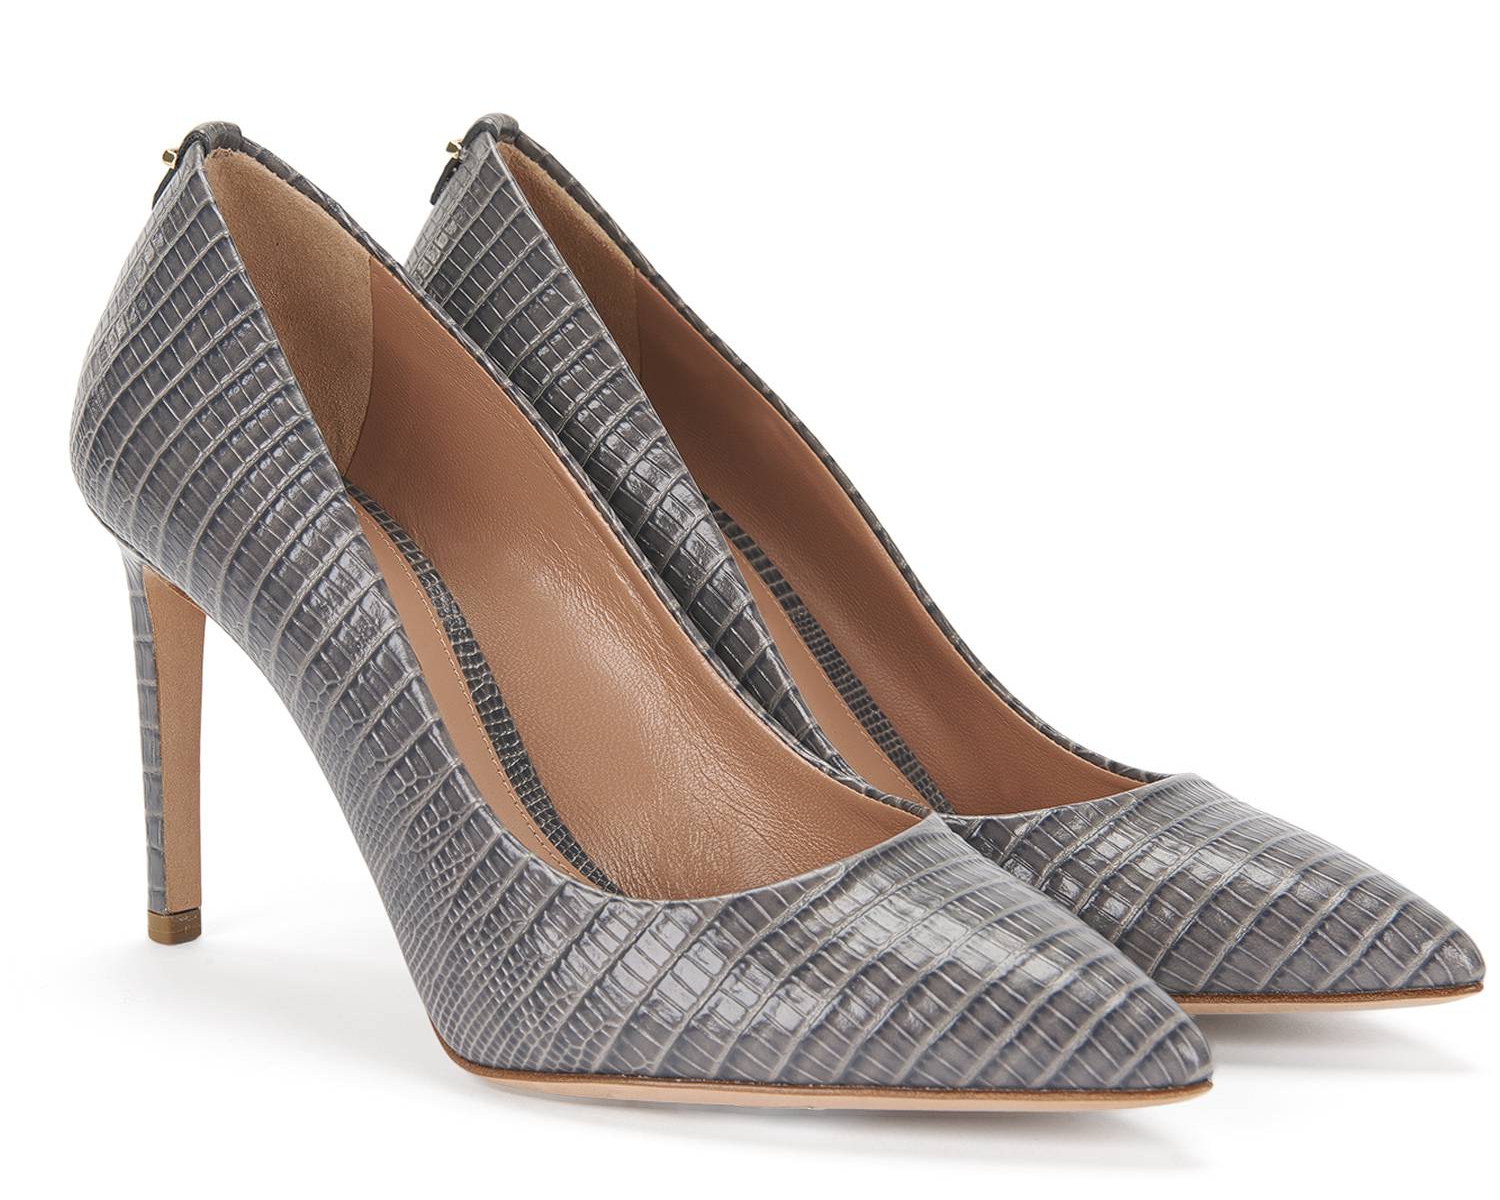 Hugo Boss 'Staple P90-L' embossed leather pumps in Anthracite (grey)